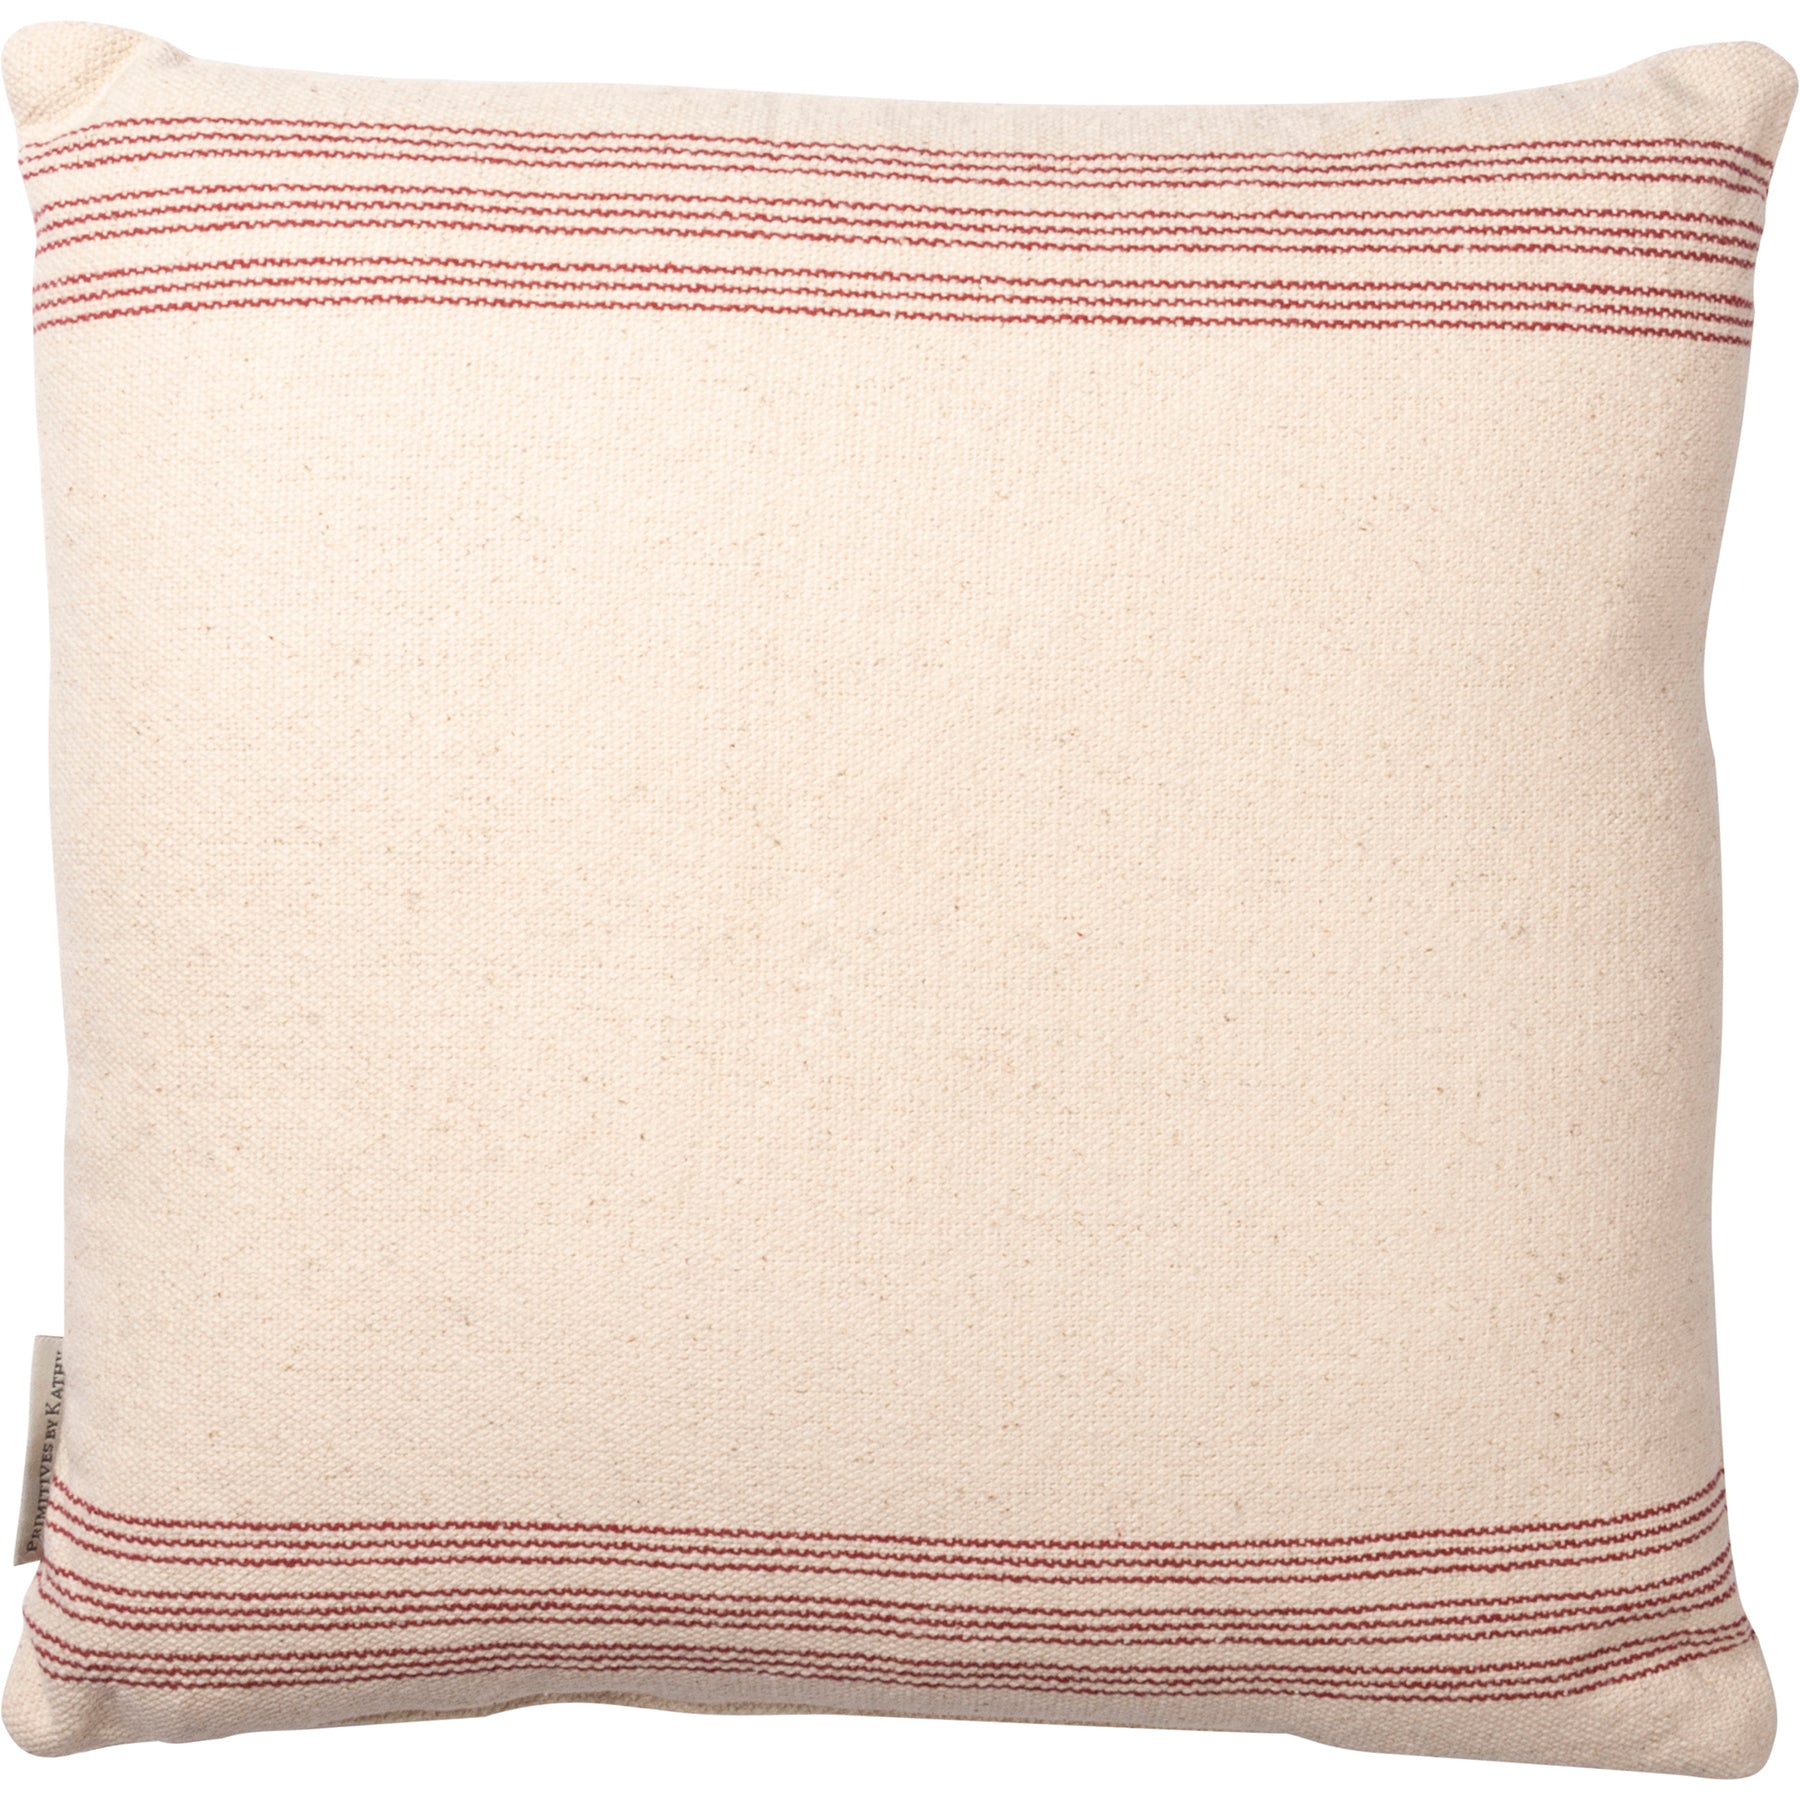 "Most Wonderful Time of The Year" Linen Pillow